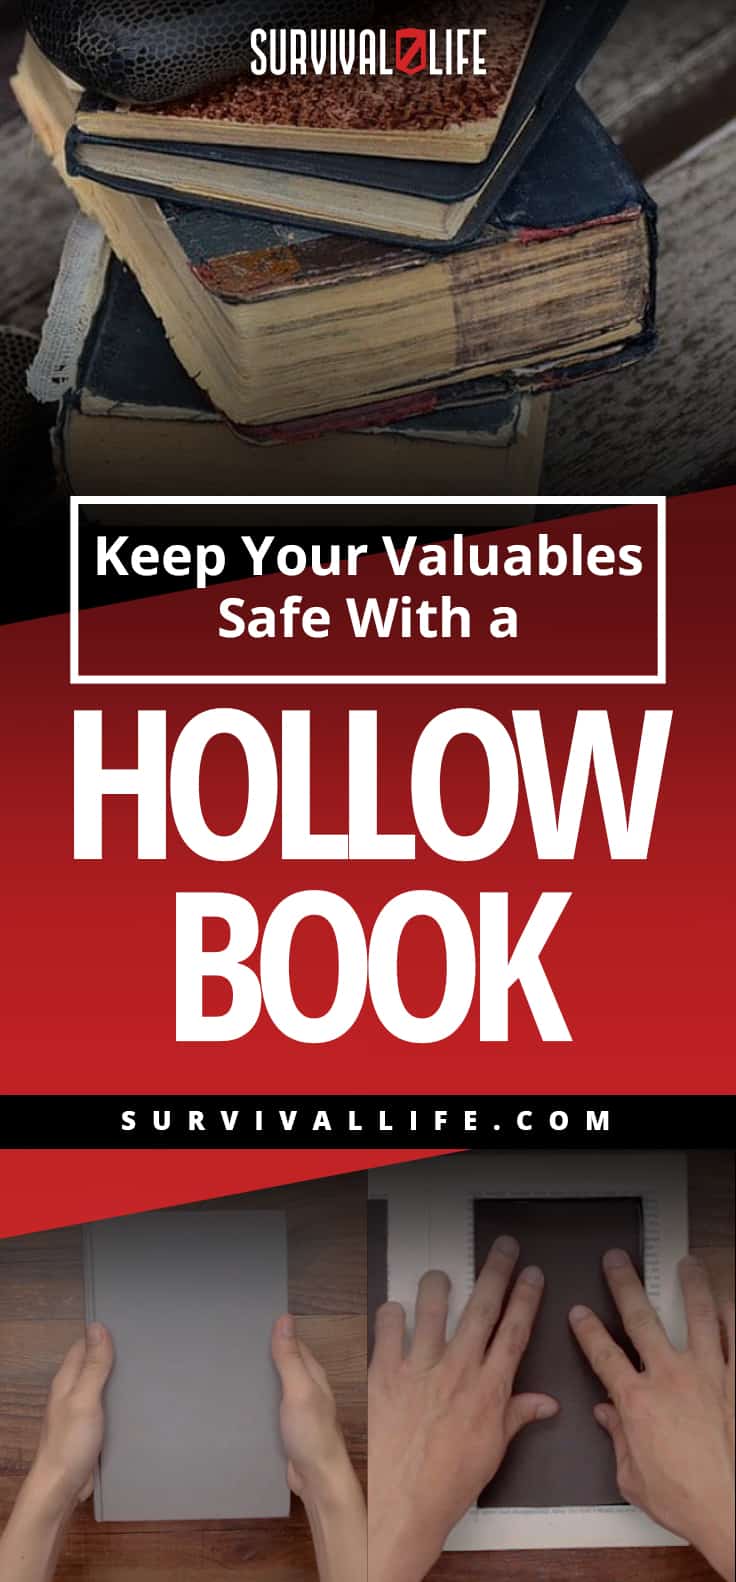 Keep Your Valuables Safe With a Hollow Book